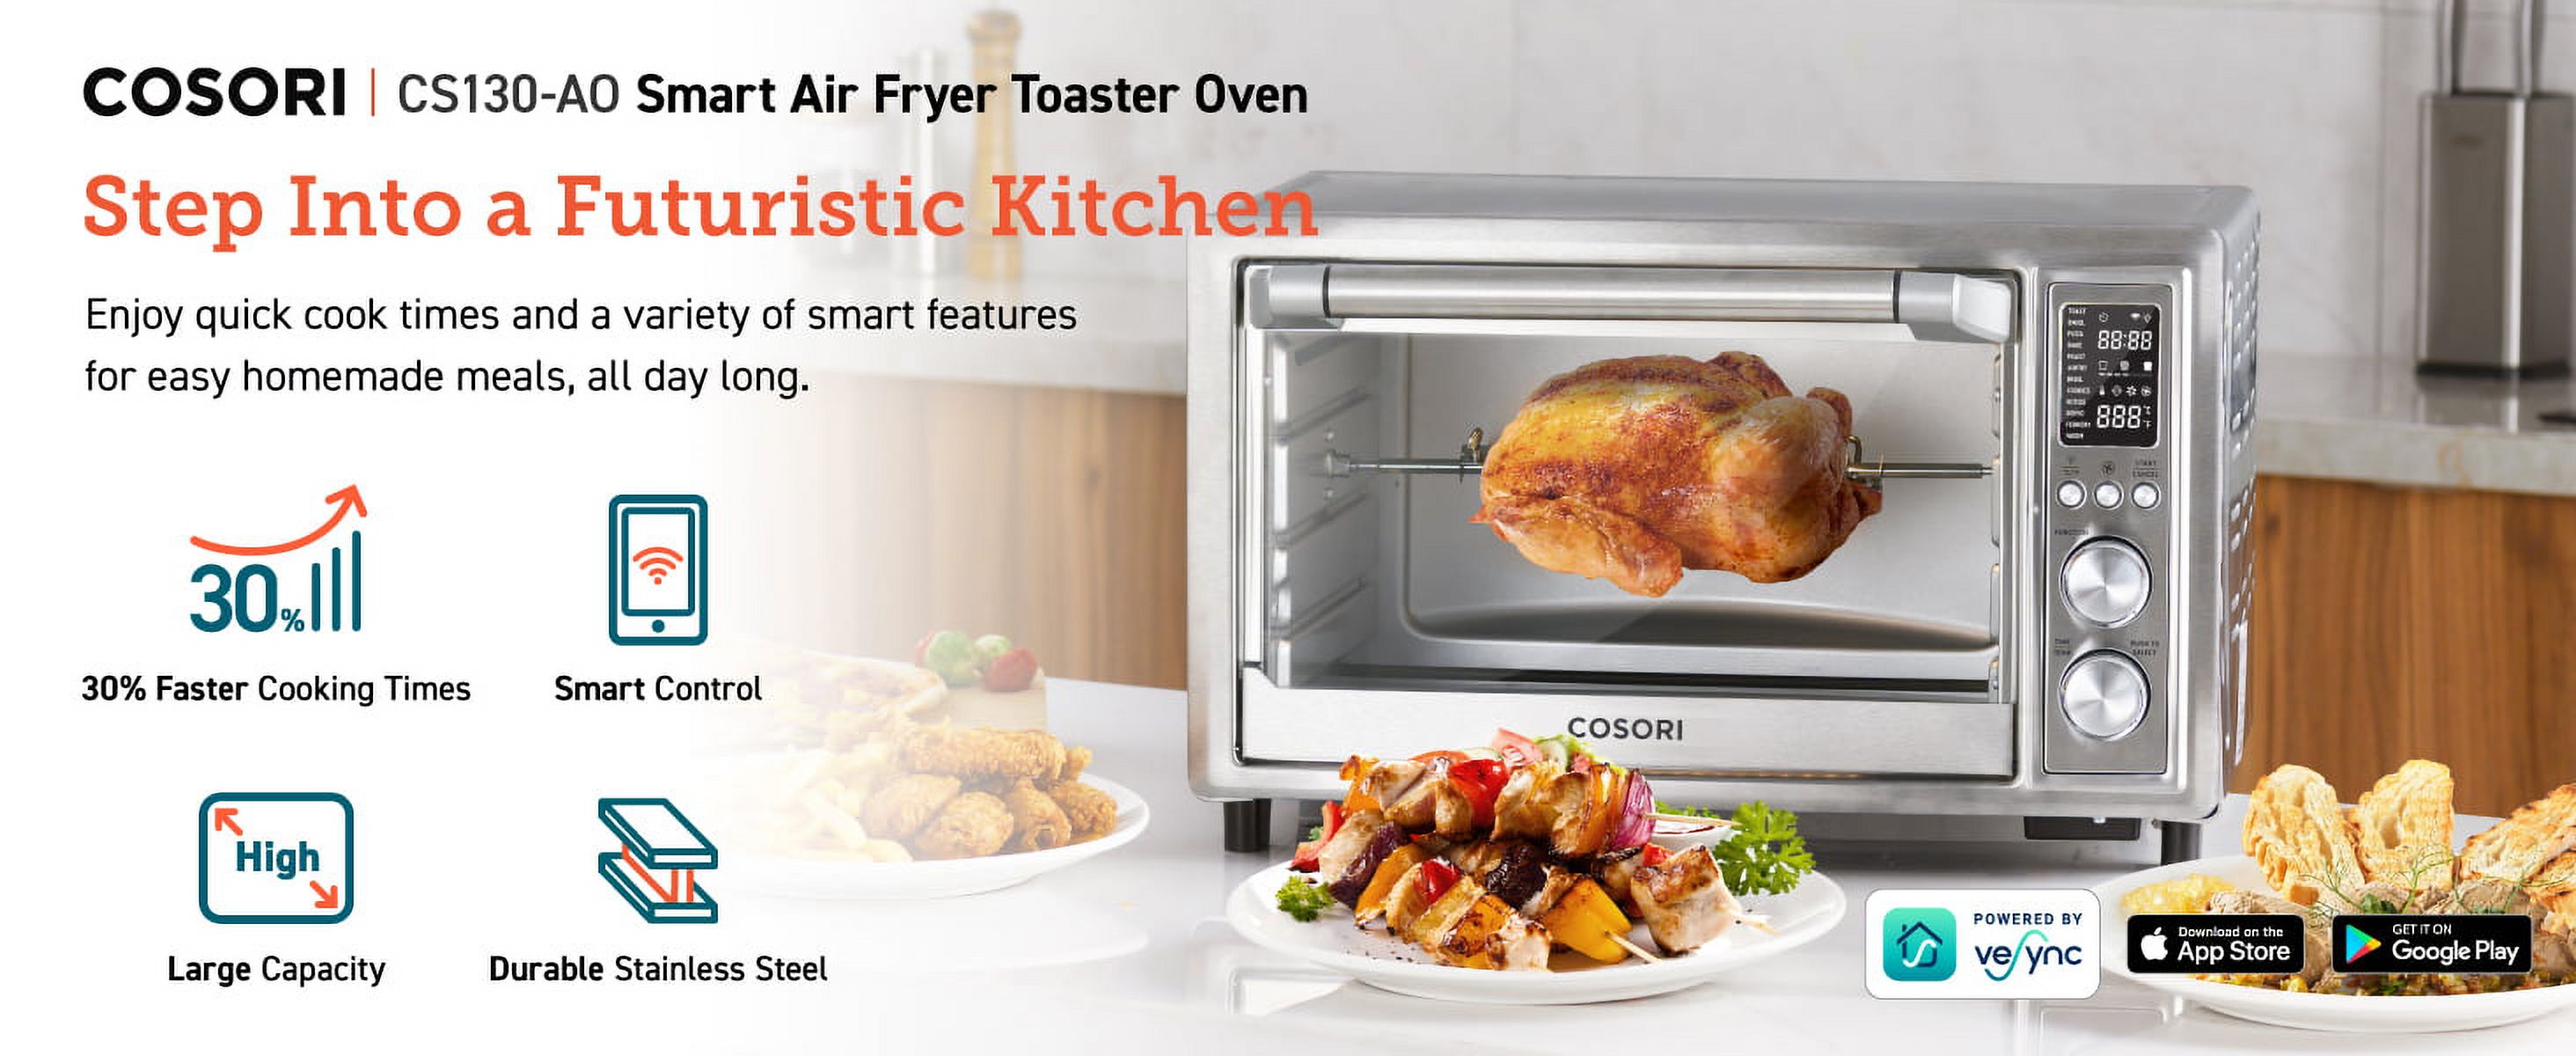 COSORI Smart Air Fryer Toaster Oven, Large 32-Quart, Stainless Steel, 12-in-1, Silver, CS130-AO - image 3 of 12